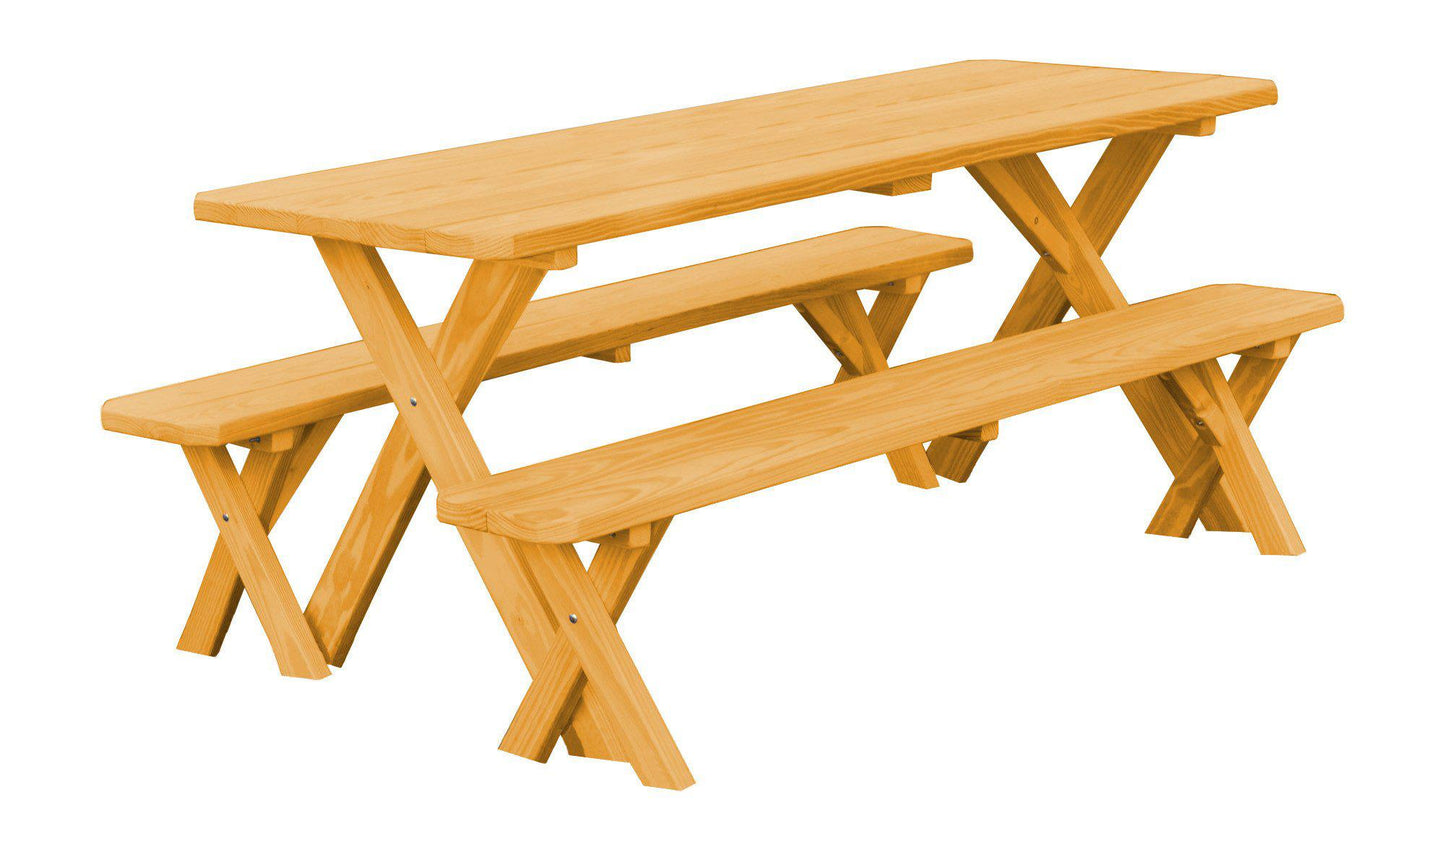 A&L Furniture Co. Pressure Treated Pine 6' Cross-leg Table w/2 Benches - LEAD TIME TO SHIP 10 BUSINESS DAYS